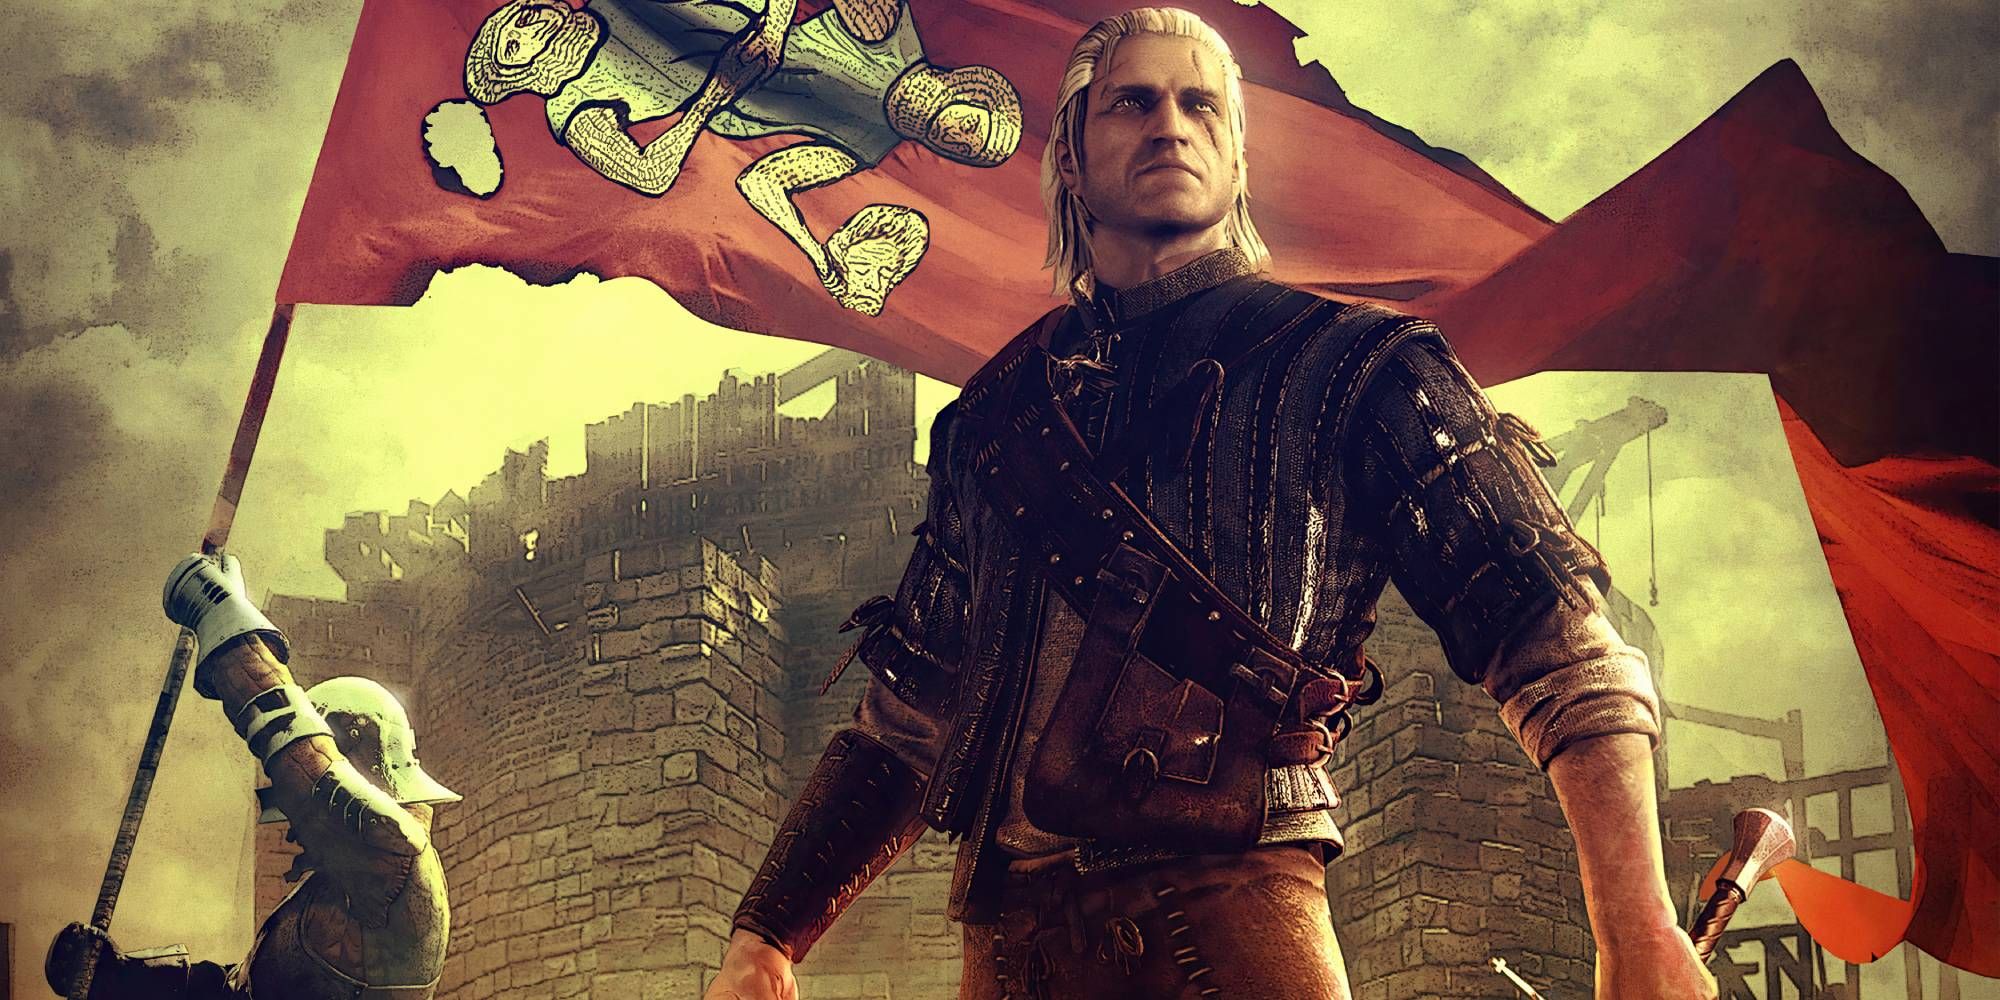 Geralt standing in front of a figure holding a banner in front of a castle